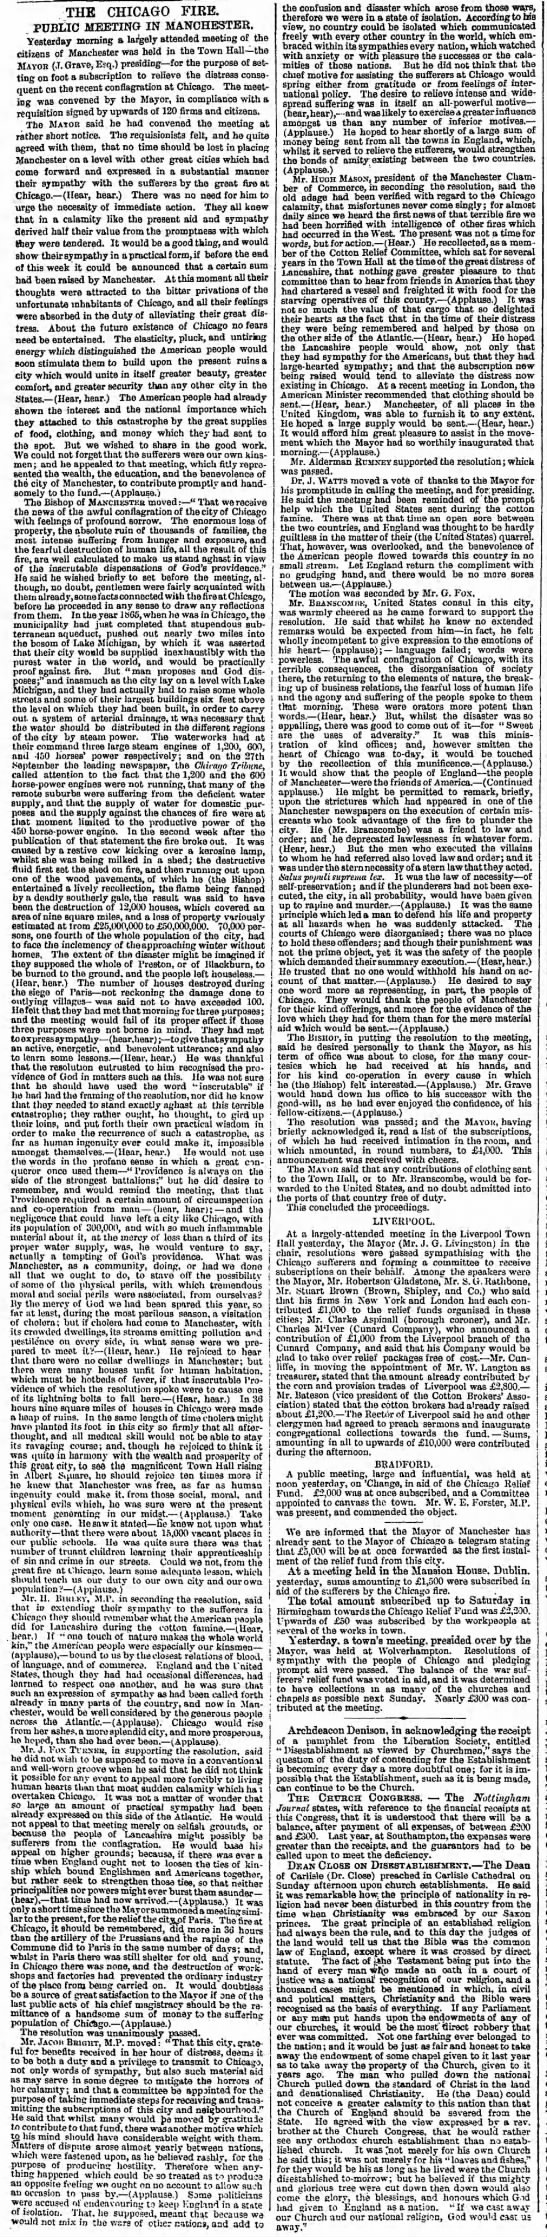 British newspaper account of a public meeting held in Manchester in 1871 about the Chicago fire - 